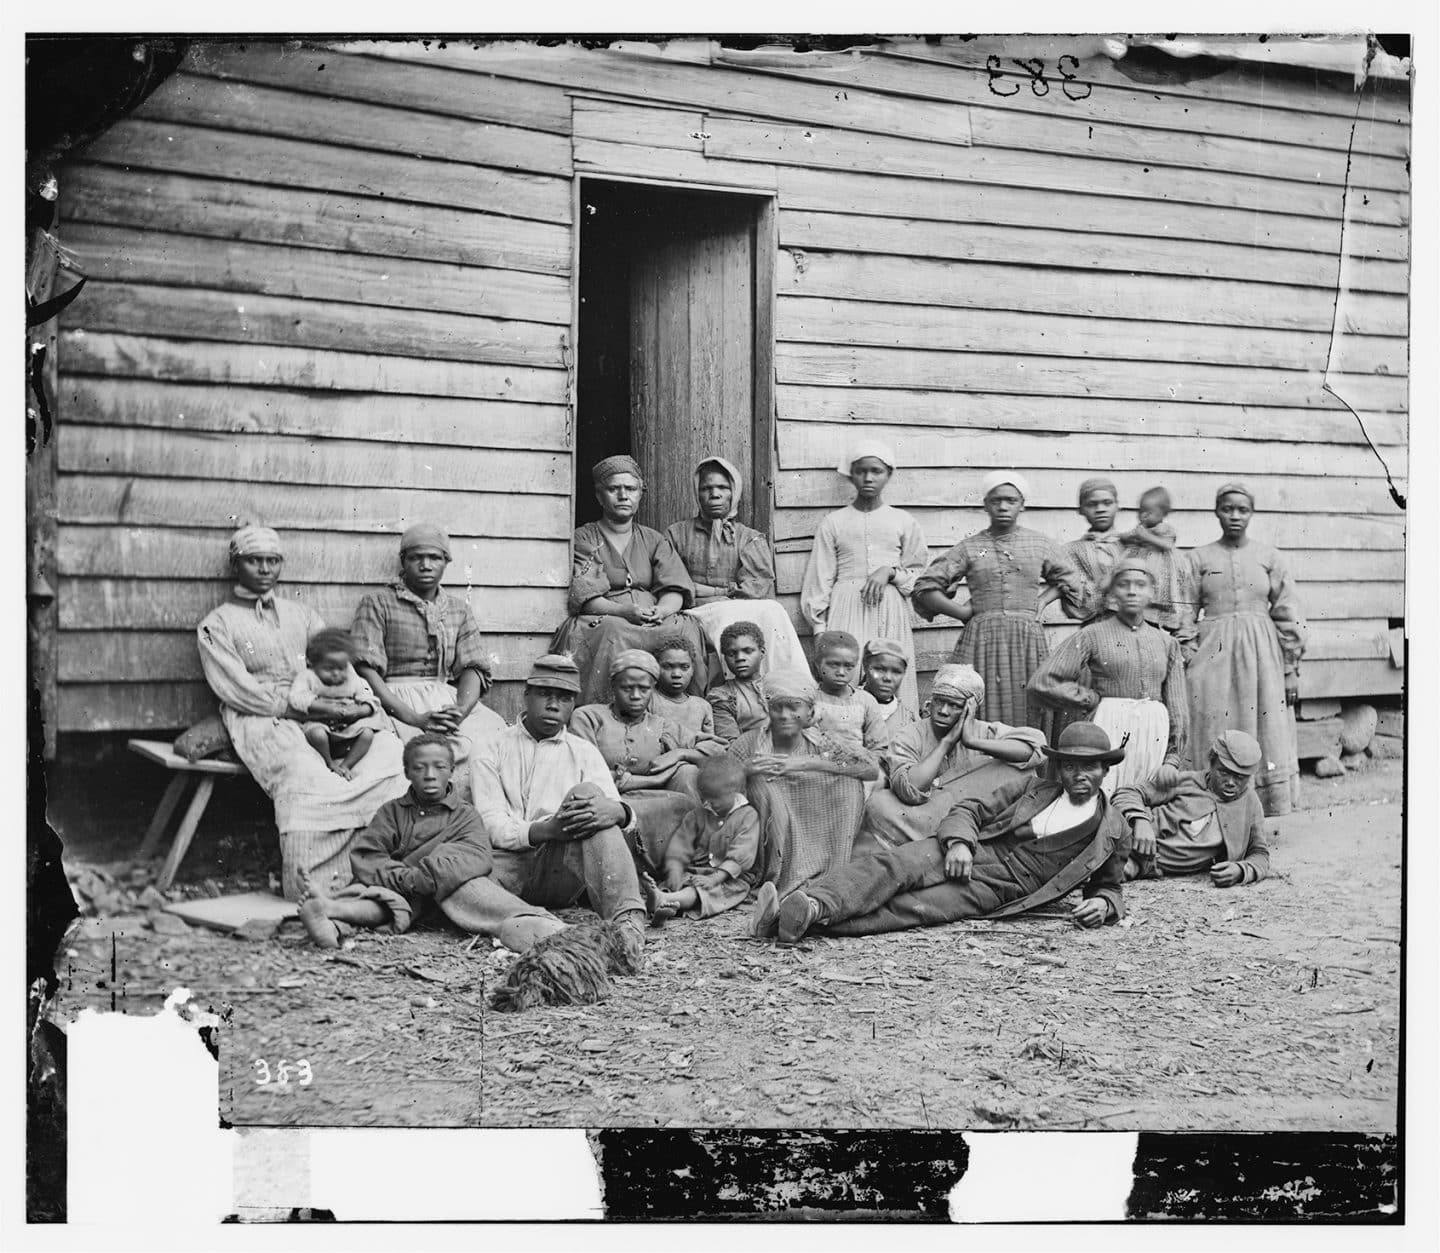 An archival image of a group of Black people sitting outside a wooden house from 1862.